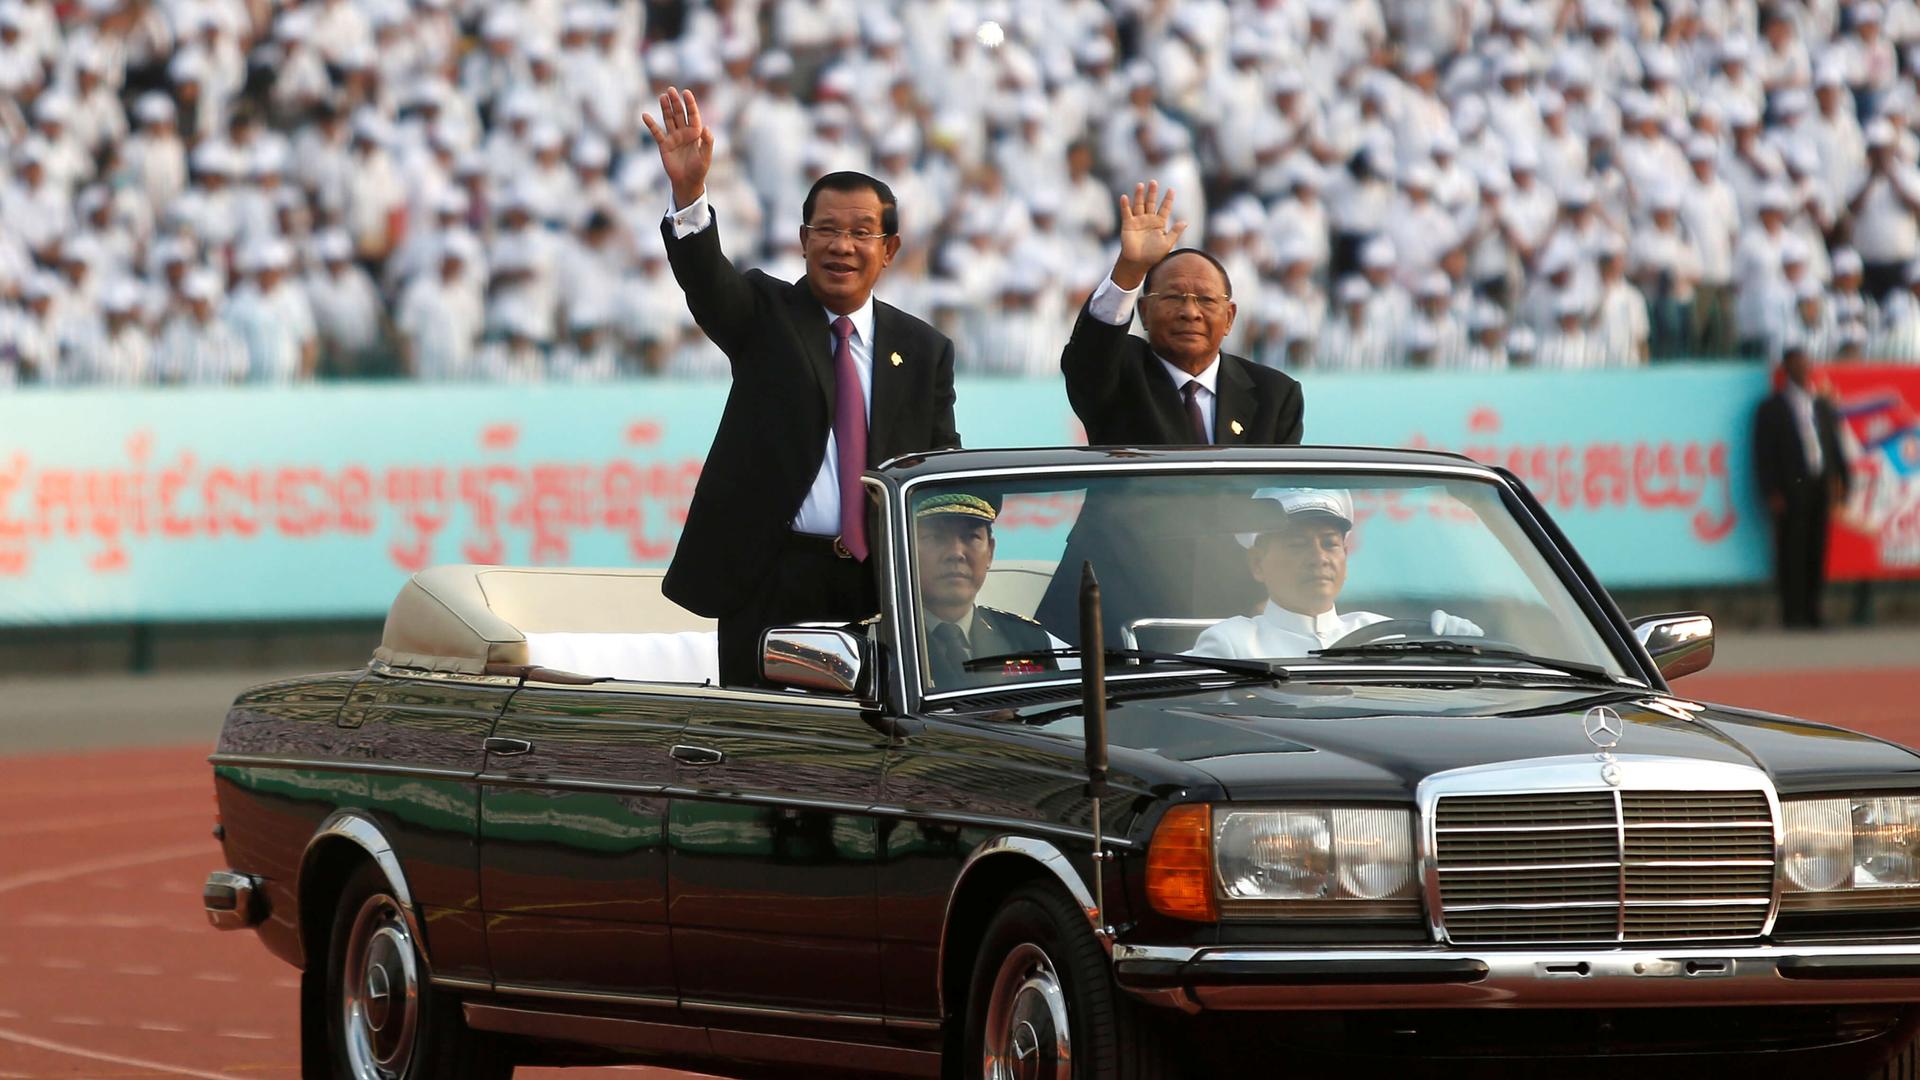 Two men wave from a convertible car.